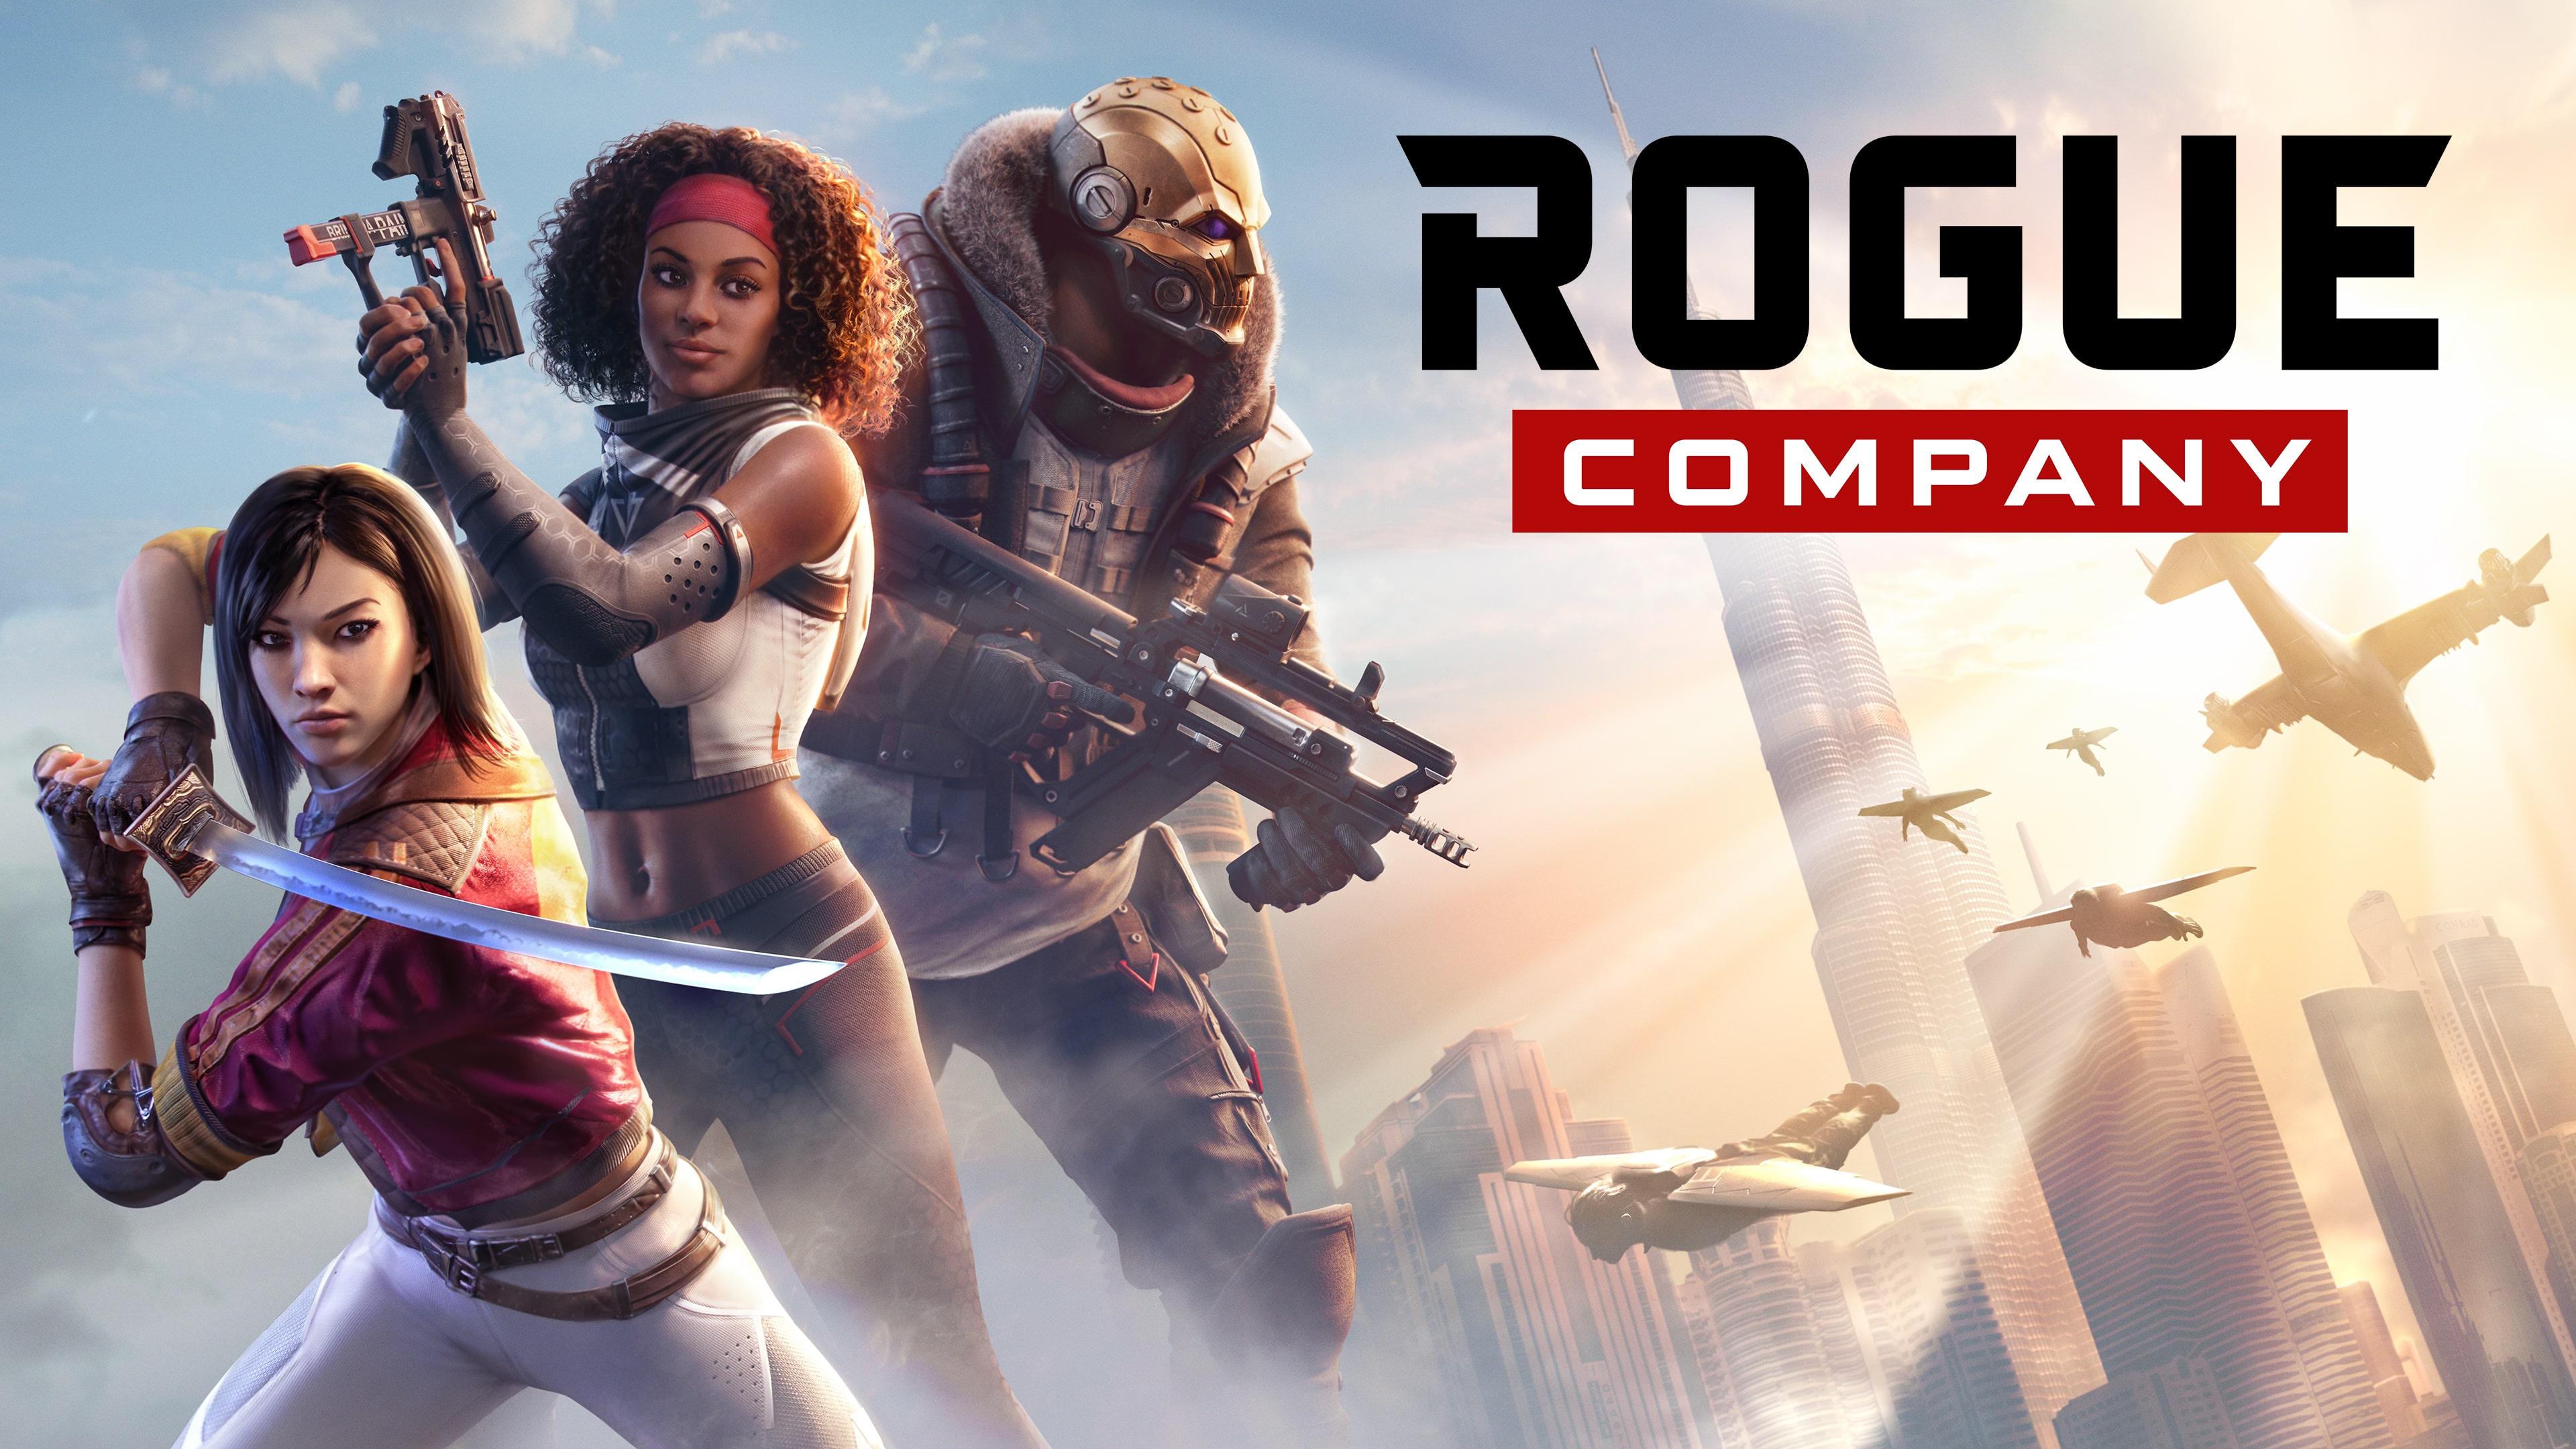 Rogue Company (Simplified Chinese, English, Japanese)